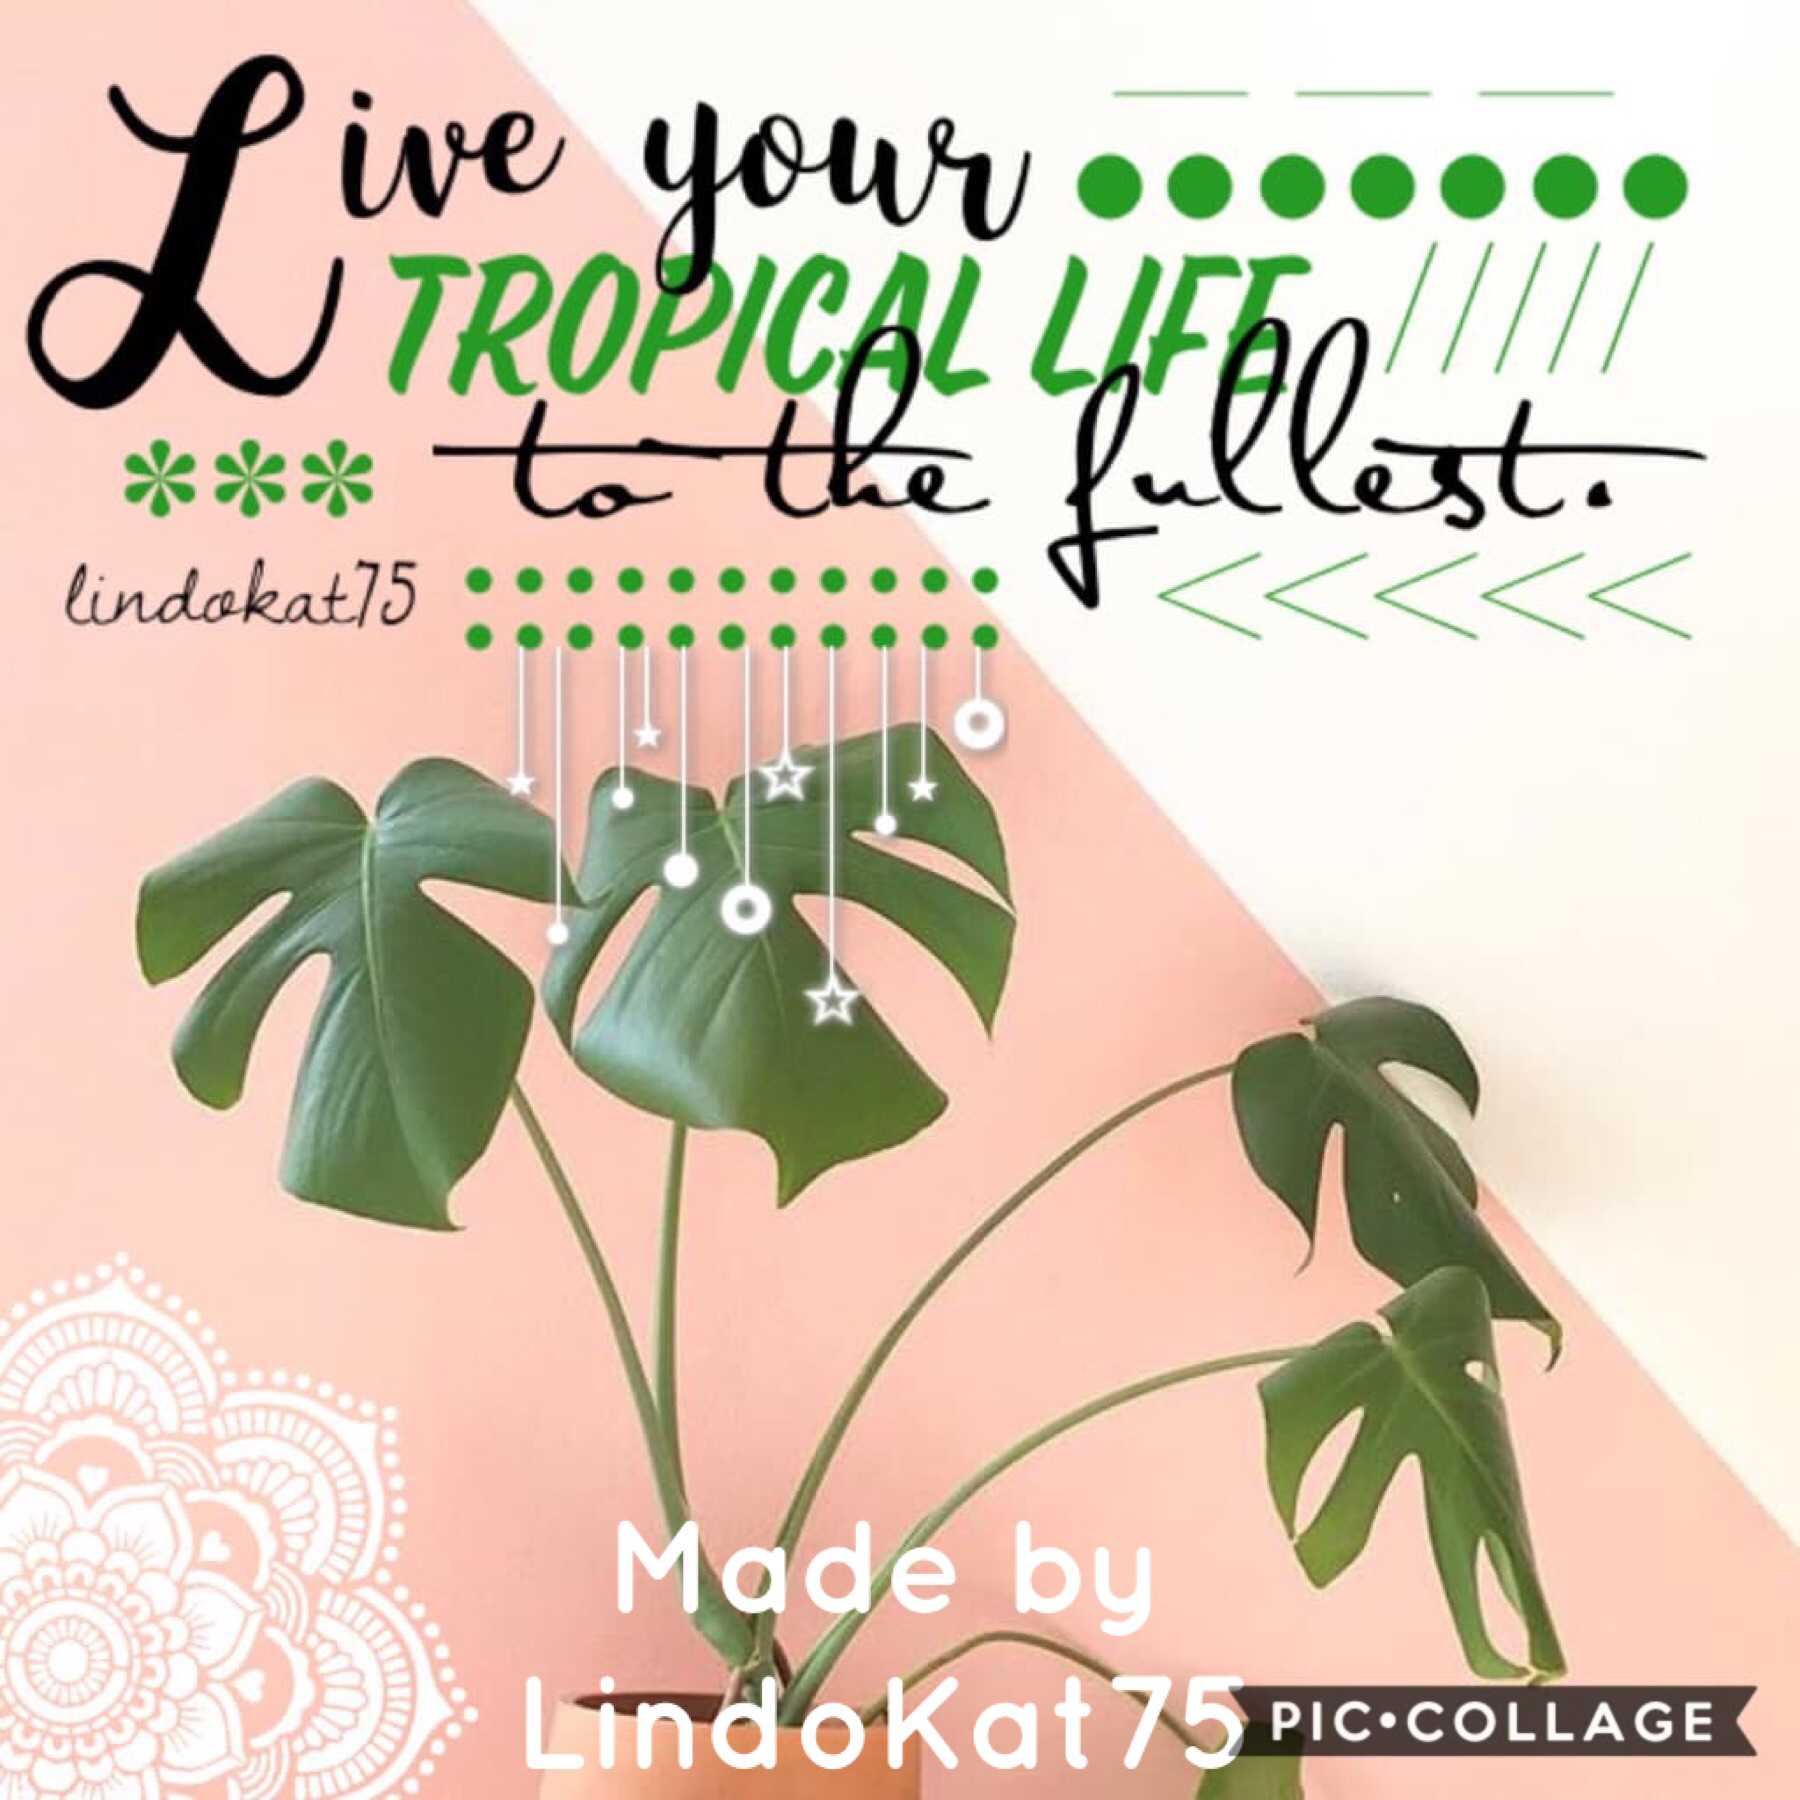 🌴🌸Tap🌸🌴
This accoubt was recommended by -blooming_melodies.  LindoKat75 makes really amazing collages but only has around 175 followers.  I would highly recommend following this account!